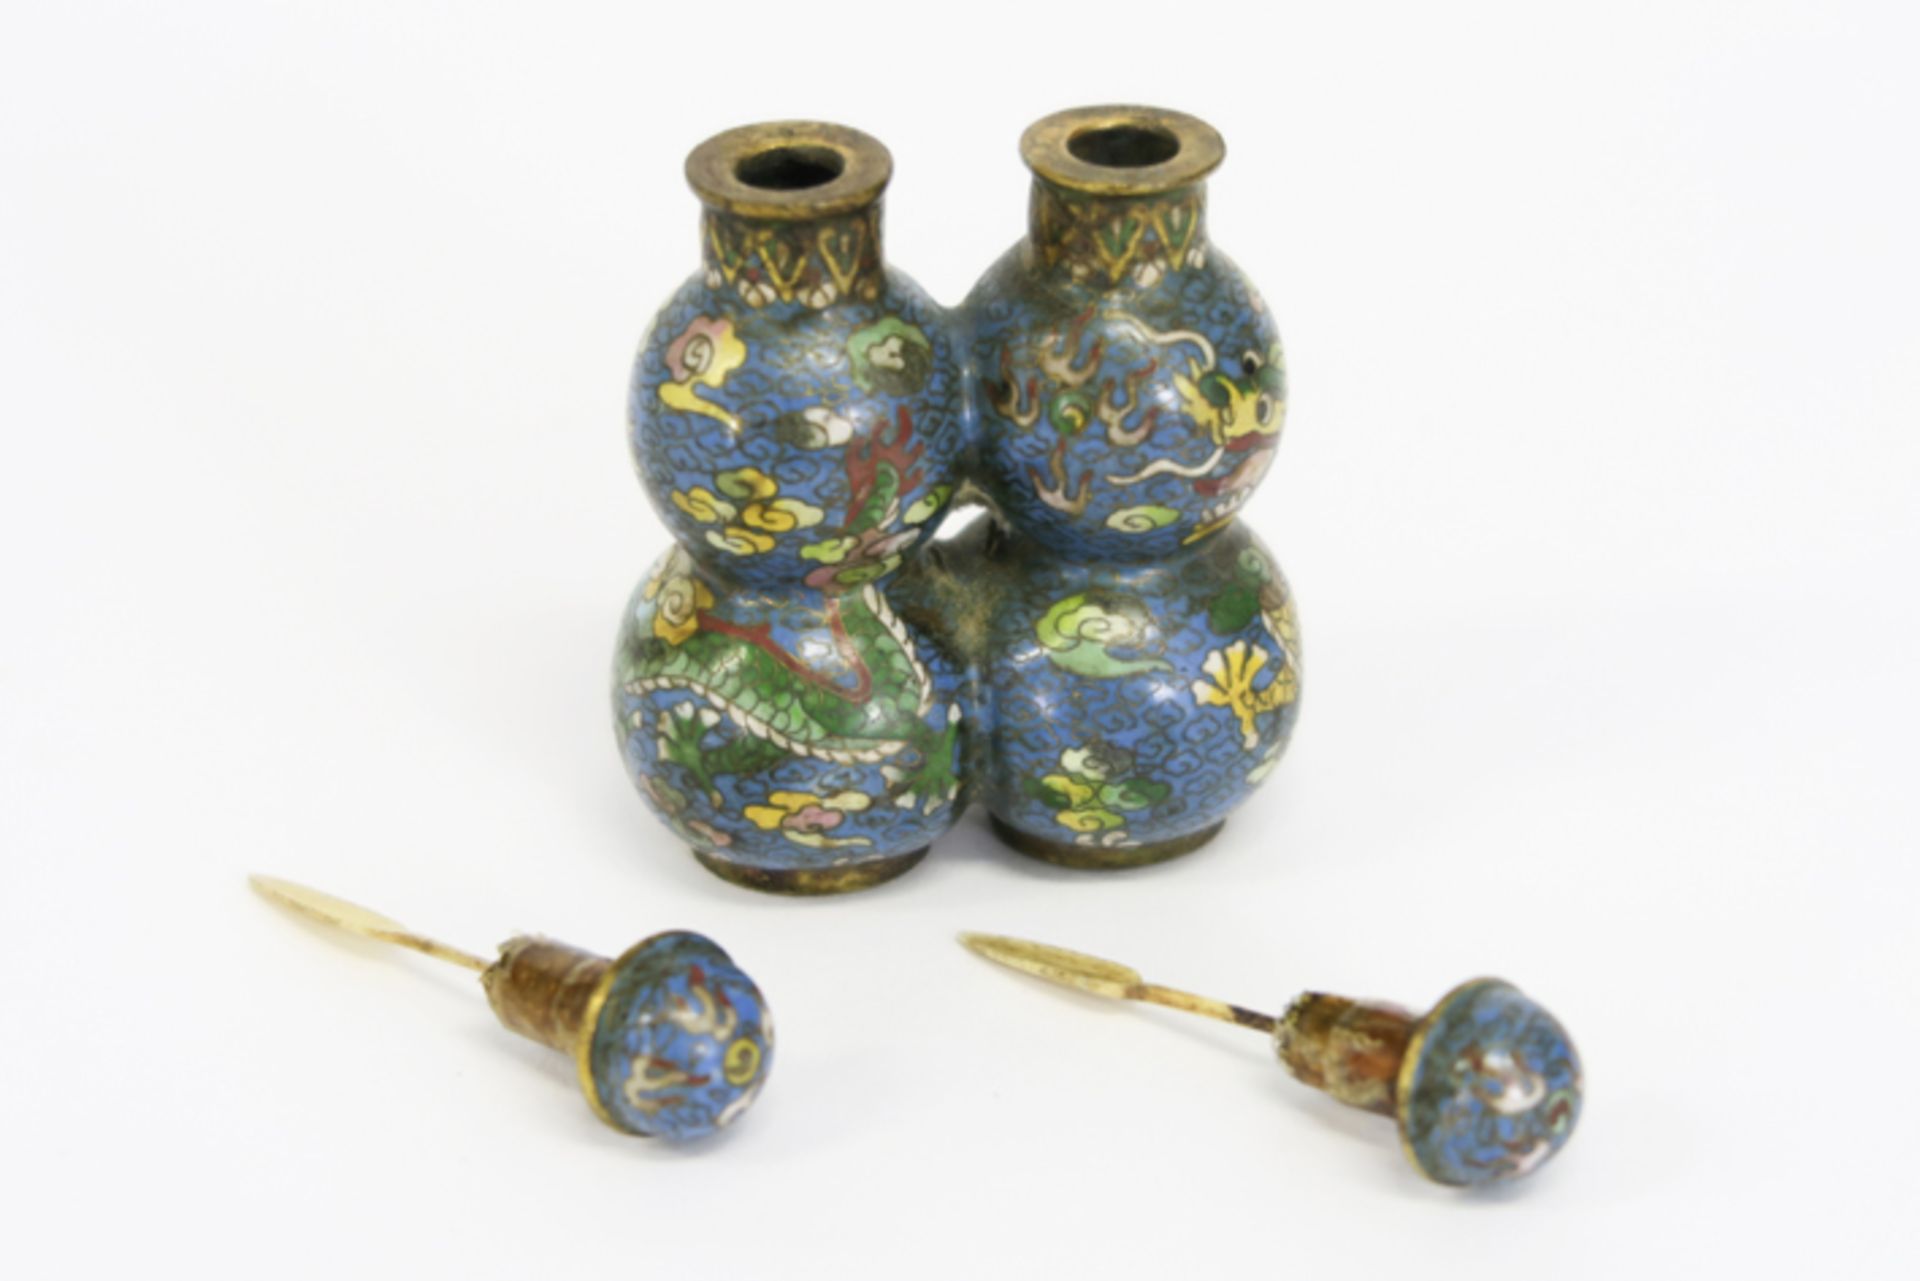 'antique' double and double gourded Chinese cloisonné snuff bottle - - 'Antieke' [...] - Image 3 of 4